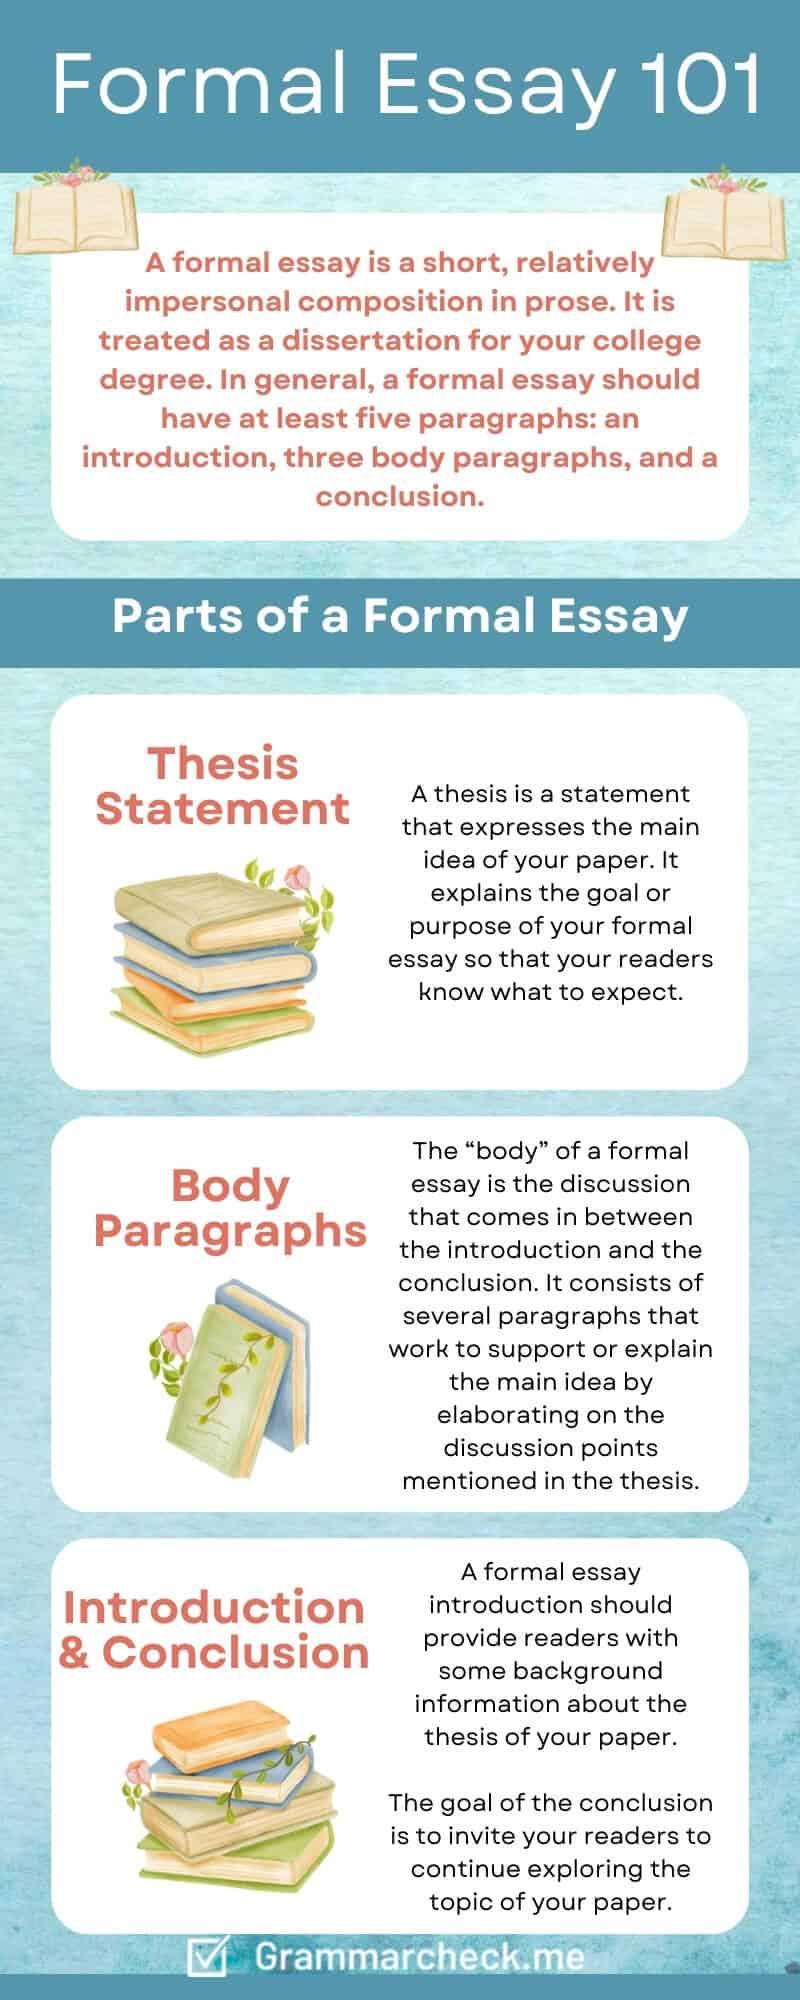 infographic containing the rules of formal writing